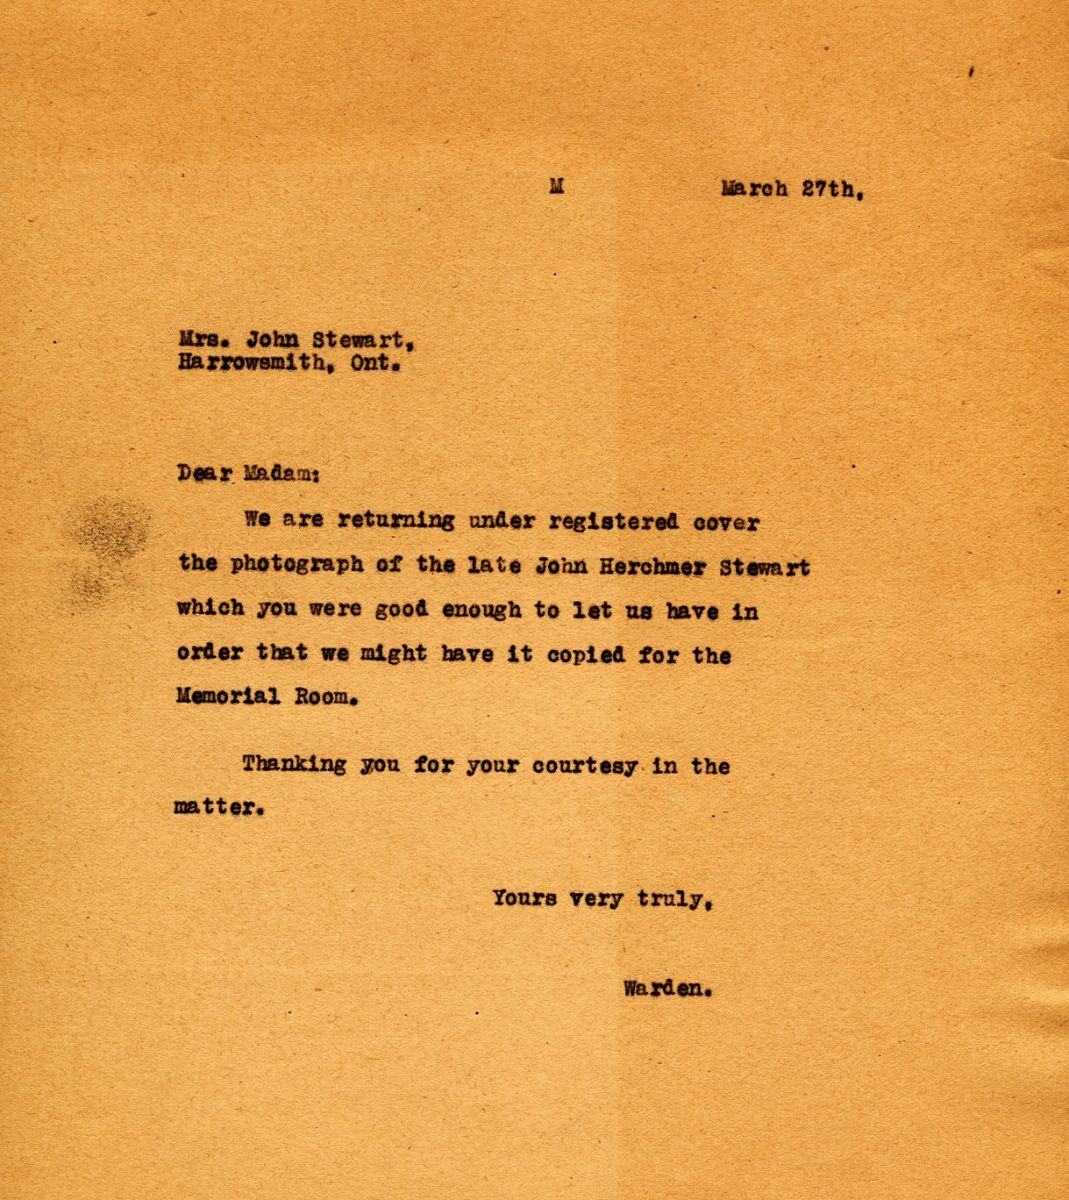 Letter from the Warden to Mrs. John Stewart, 27th March